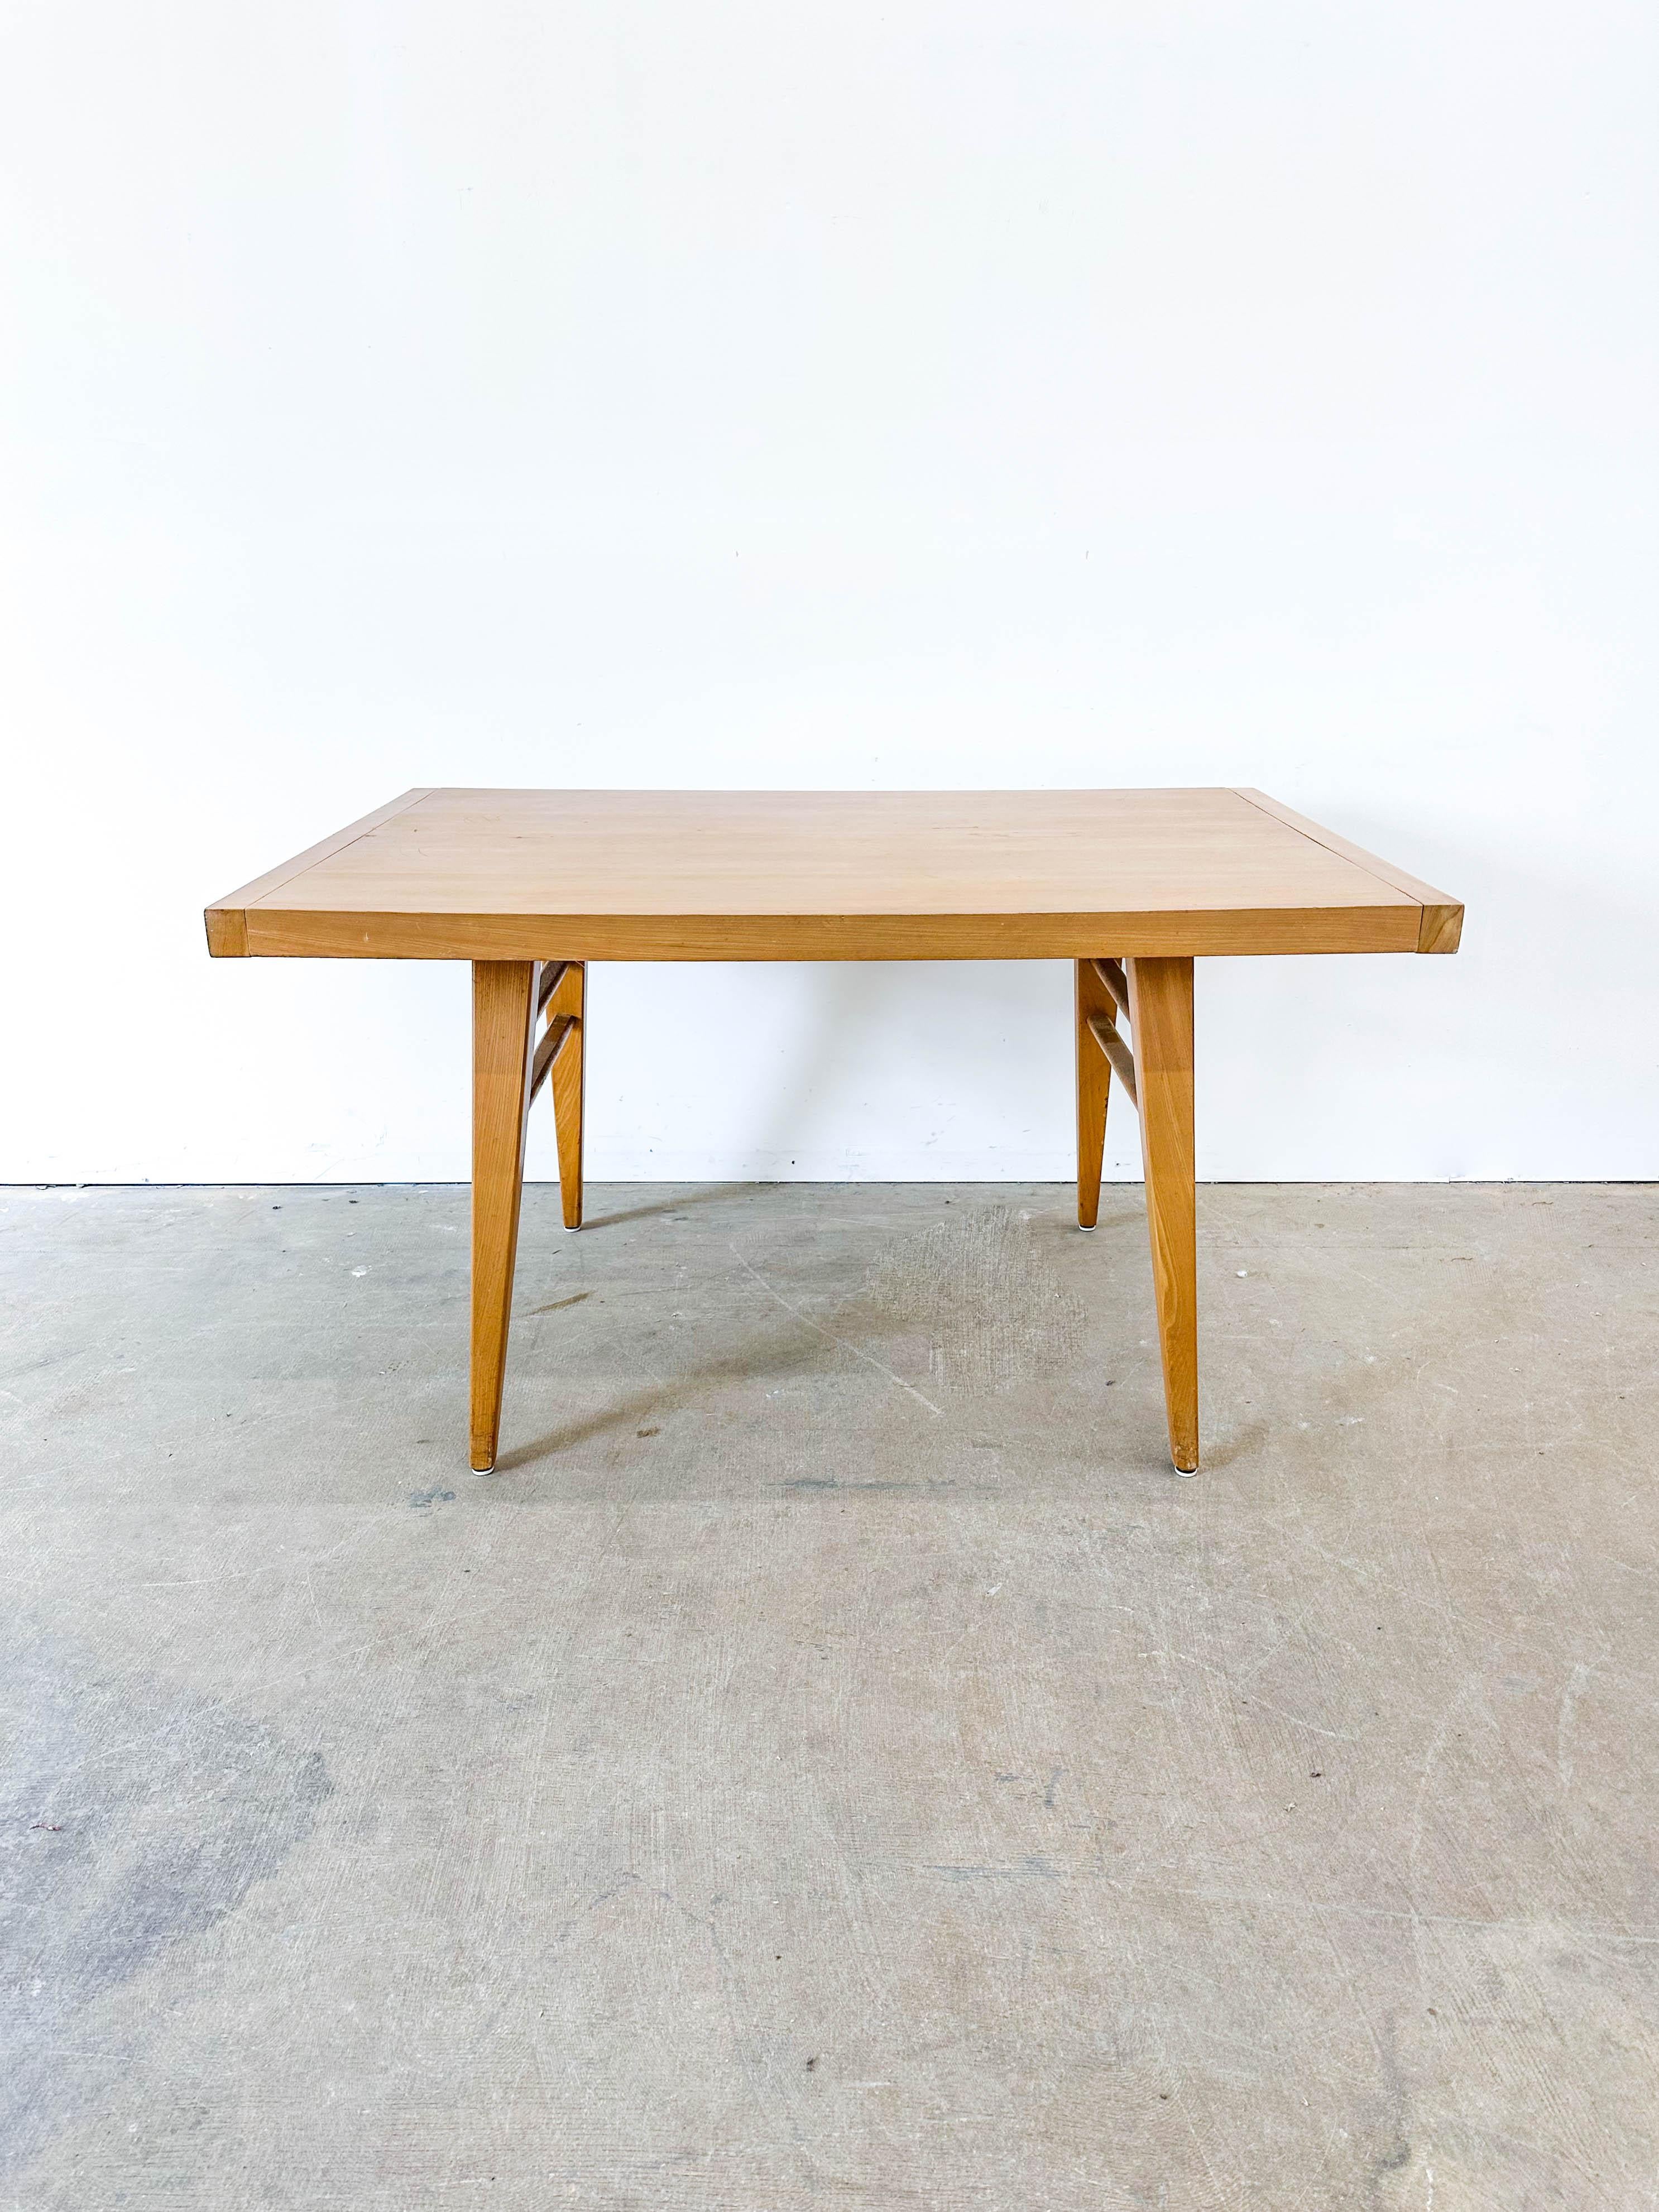 Birch dining table designed by Merton Gershun for his Budgetrend line for Dillingham. Unmistakably influenced by or copied from George Nakashima’s N20 dining table for Knoll in the late 1940s. Indeed several sellers have sold this as an actual